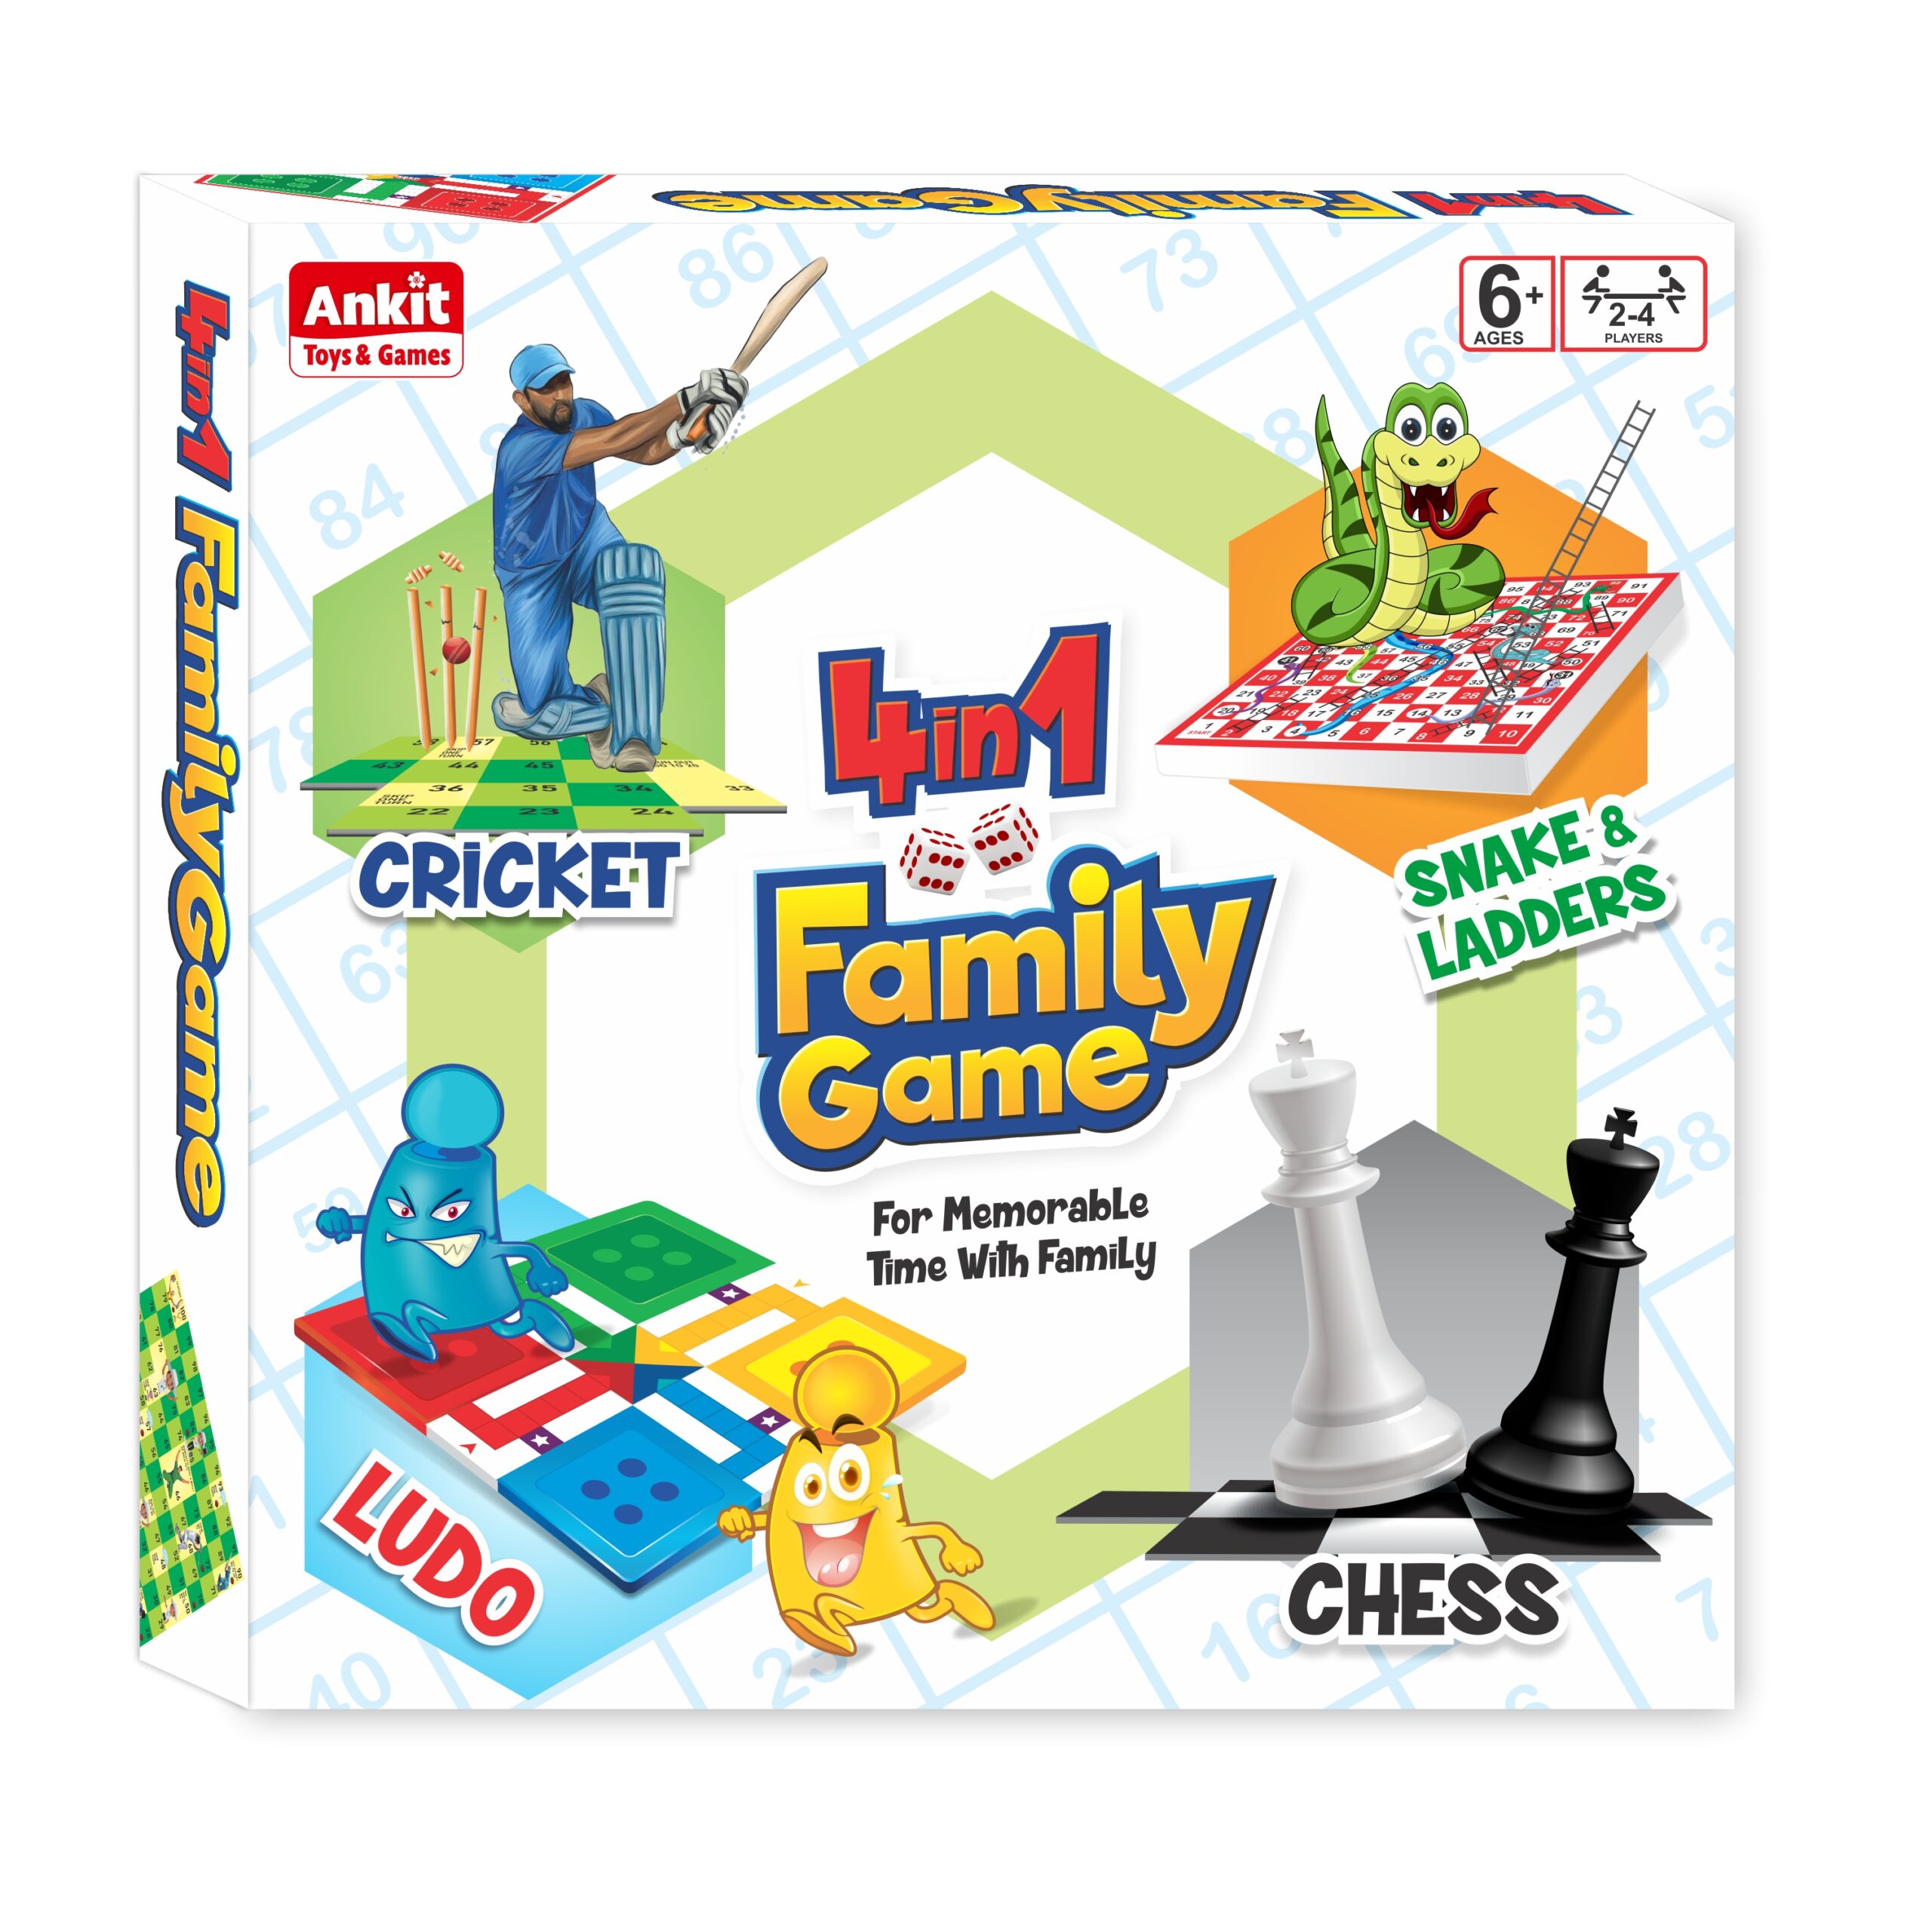 Ankit toys 4 in 1 Family Game